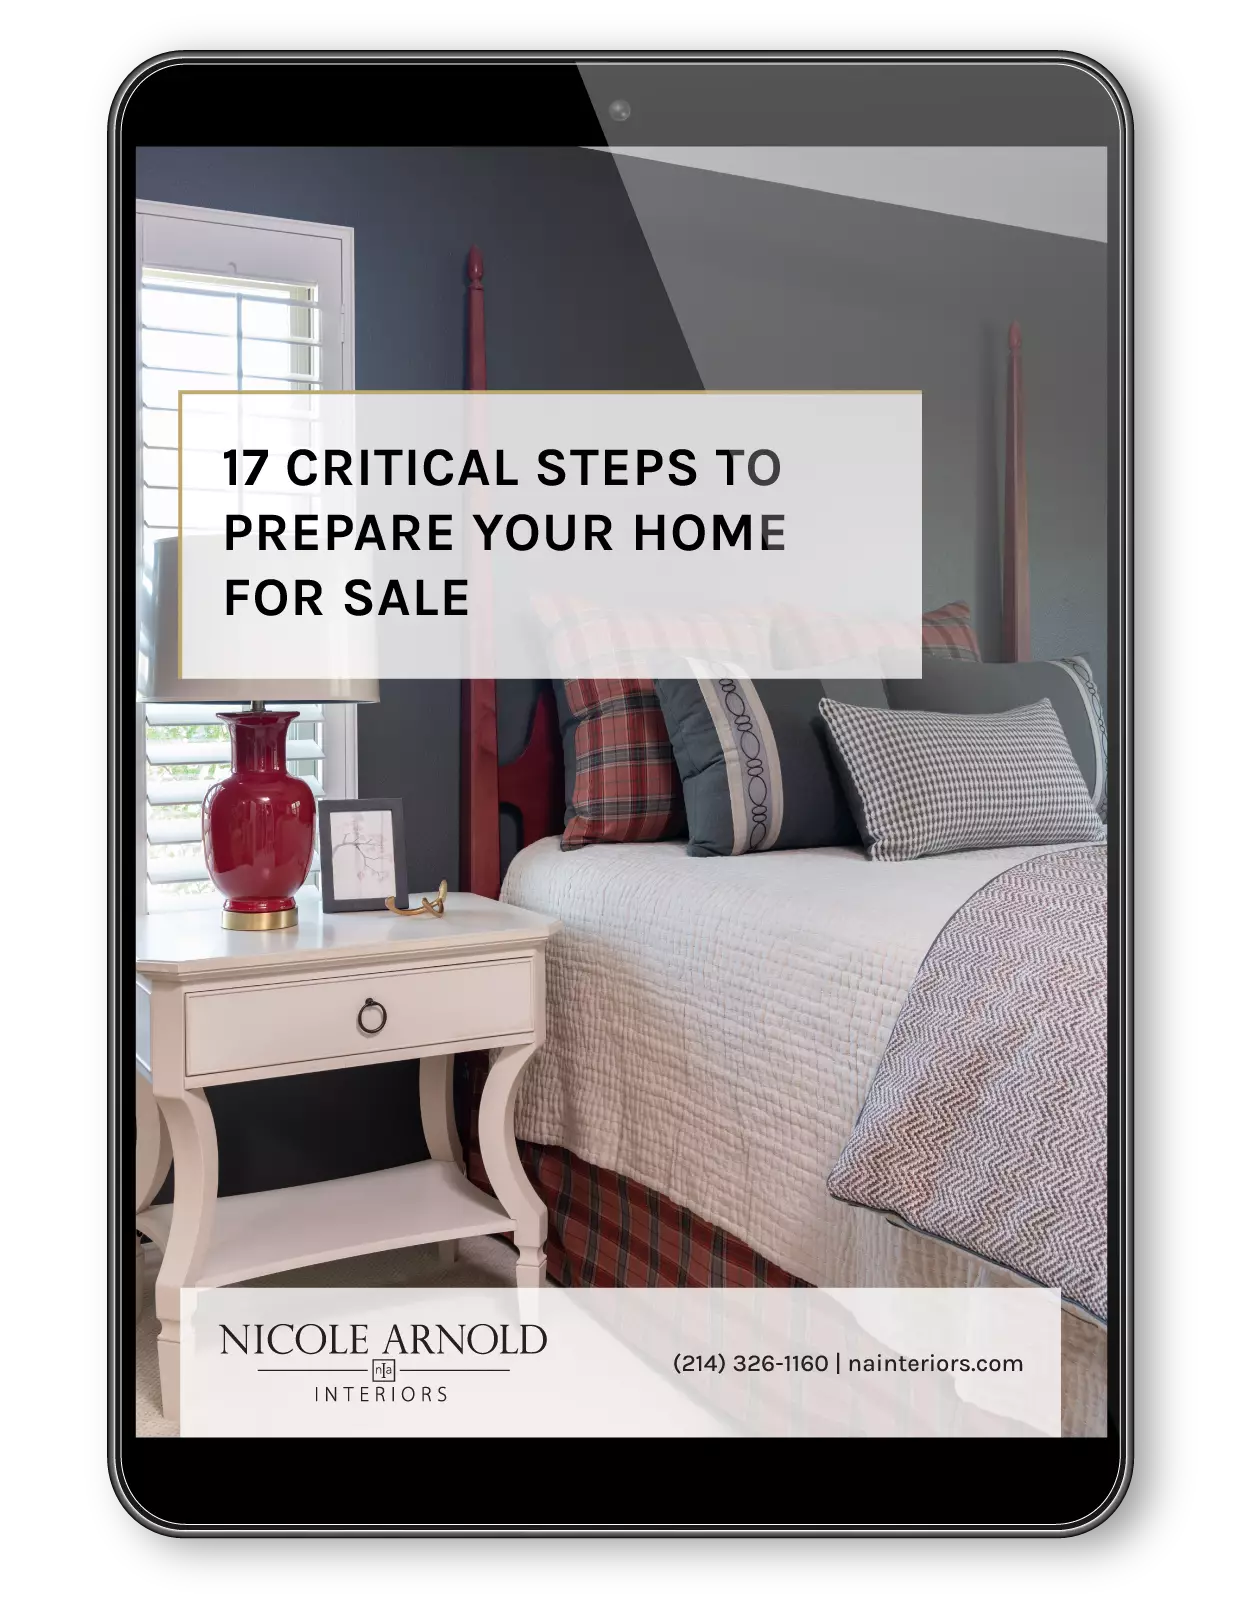 17 Critical Steps to Prepare Your Home for Sale